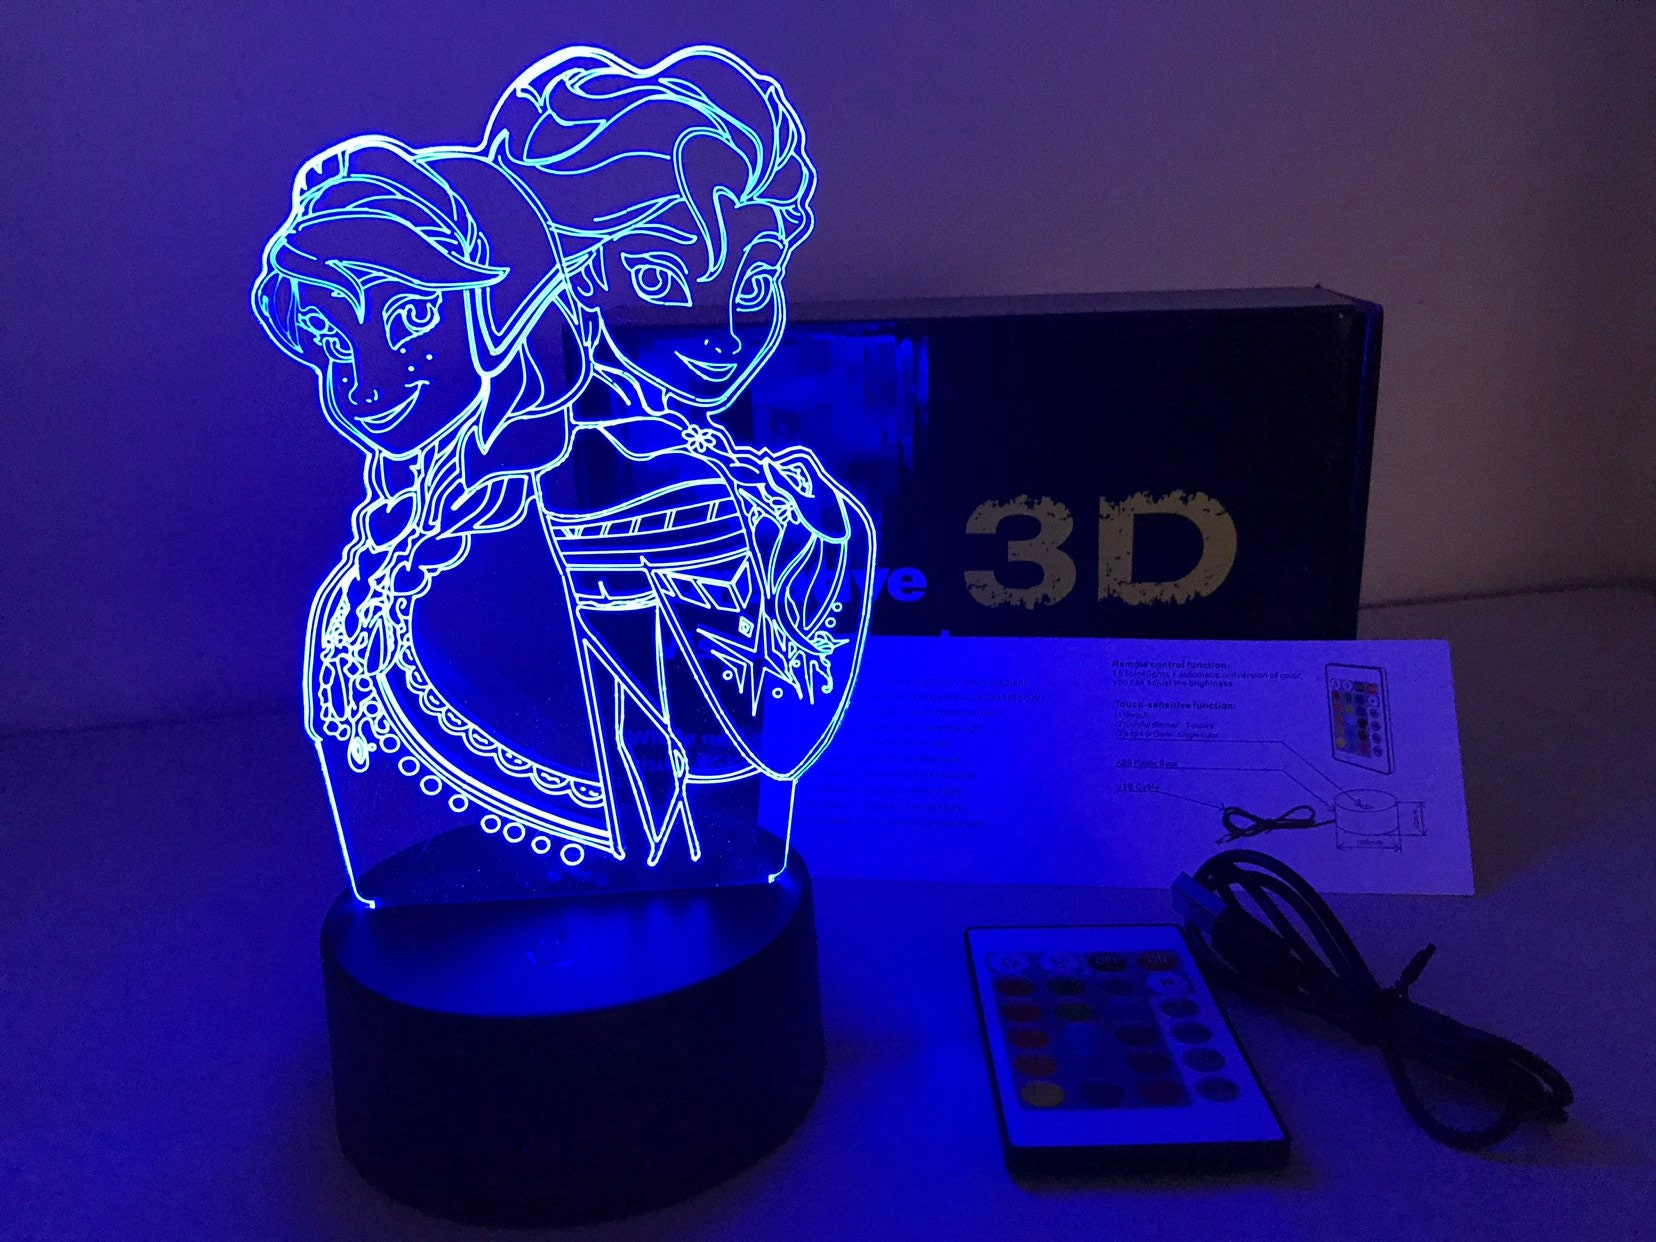 Frozen 3D LED Lamp with a base of your choice! - PictyourLamp